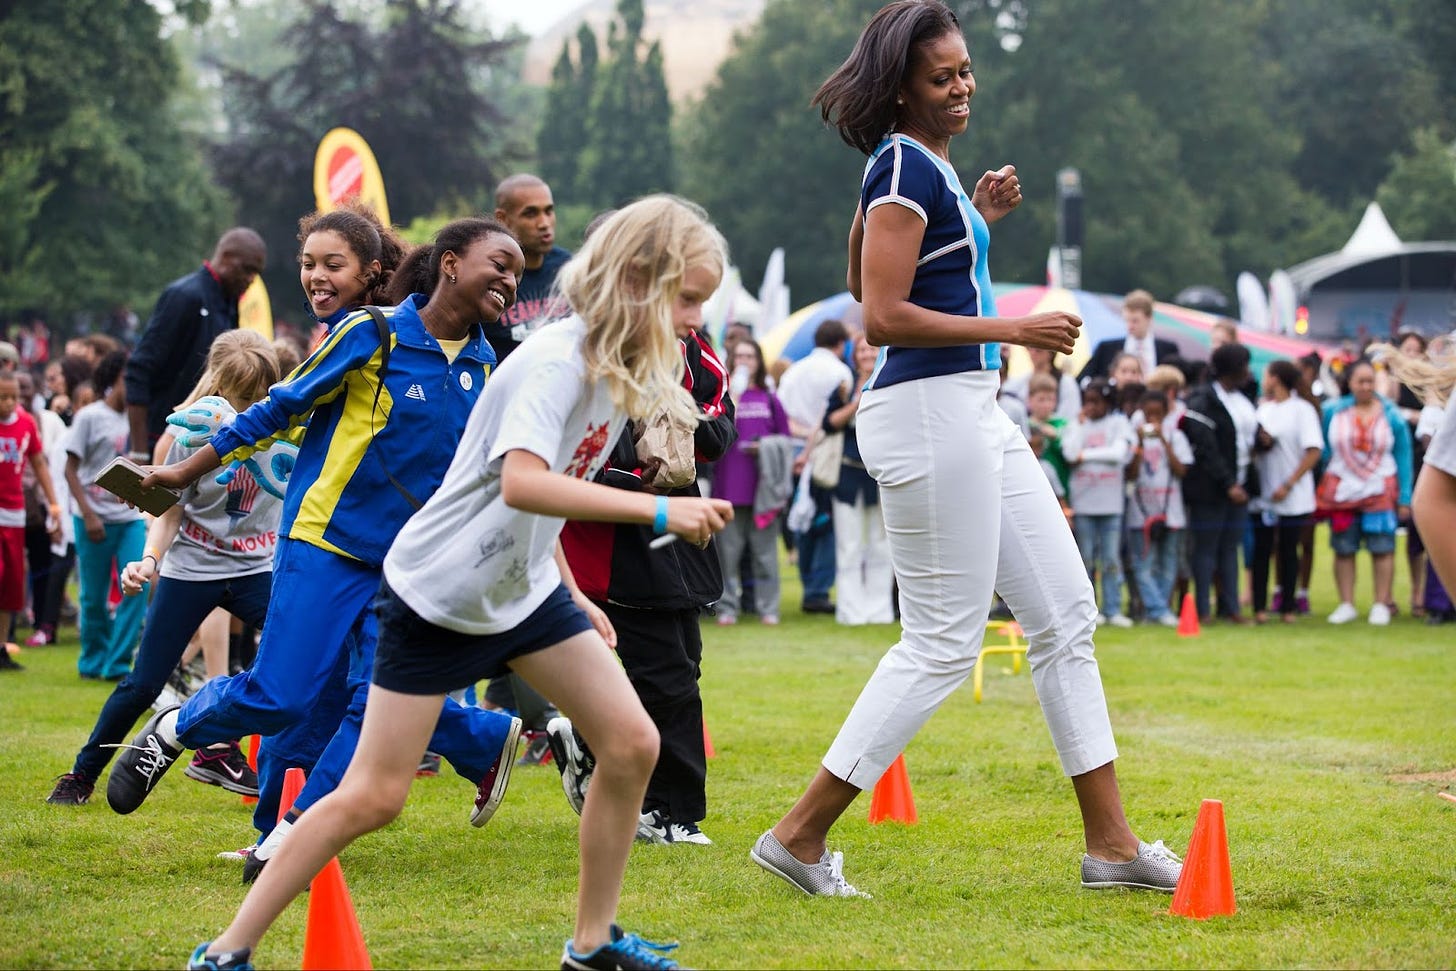 Former First Lady Michelle Obama participates in an activity during a “Let’s Move!” event in 2012 in London. 